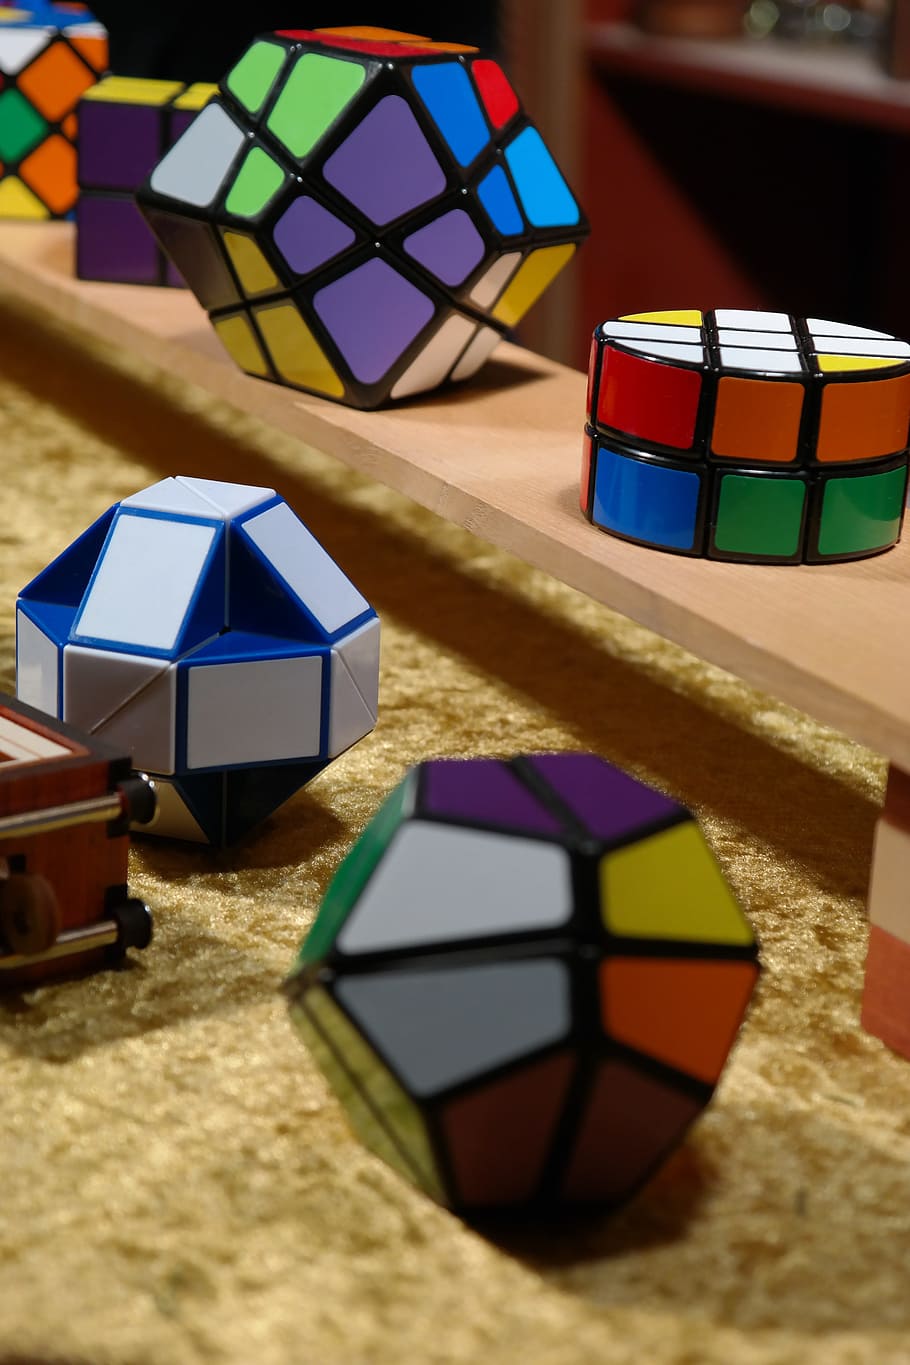 Magic Cube, Patience, Games, Puzzle, patience games, tricky, toys, puzzle piece, play, metal